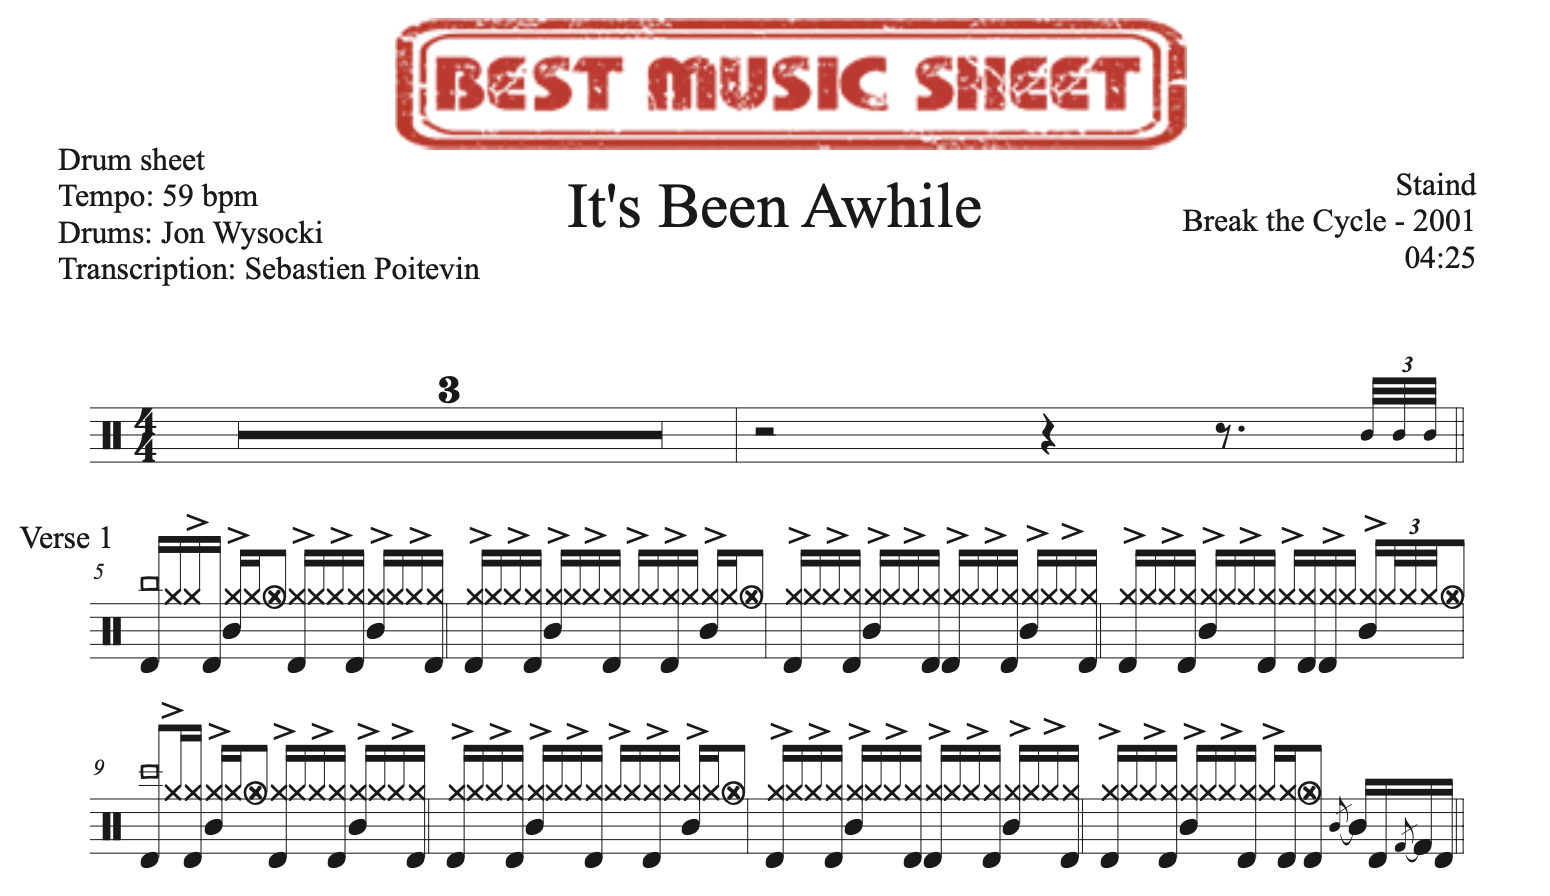 Sample drum sheet of It's Been Awhile by Staind